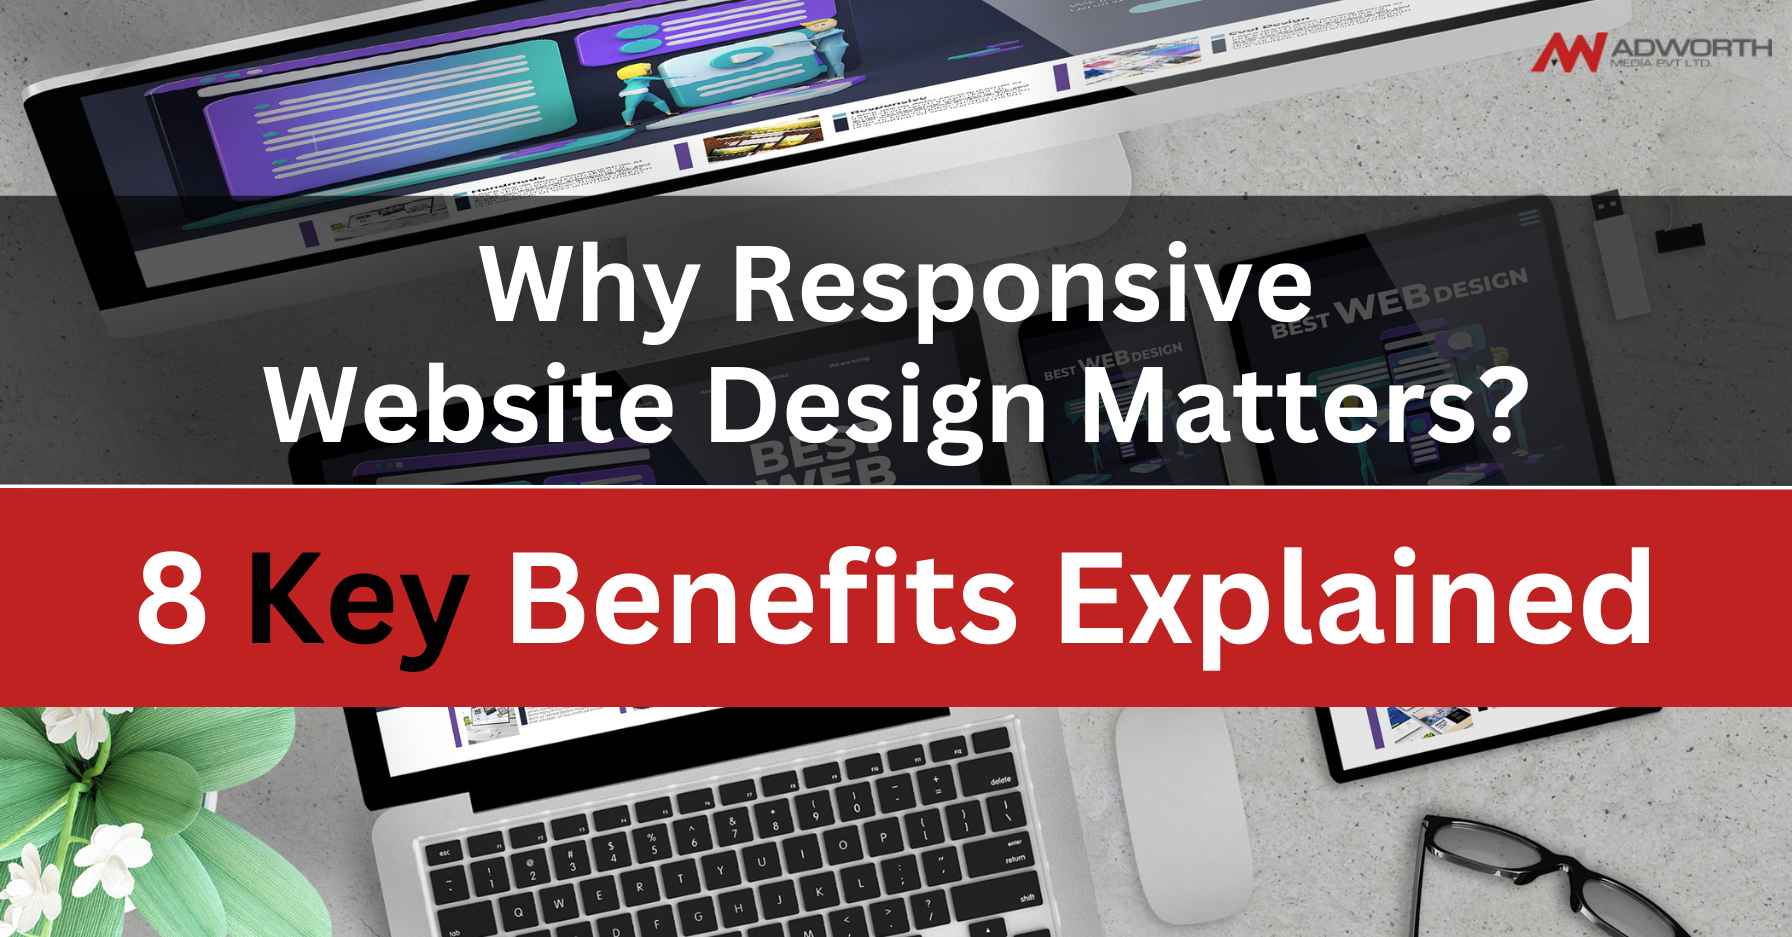 Why Responsive Website Design Matters 8 Key Benefits Explained